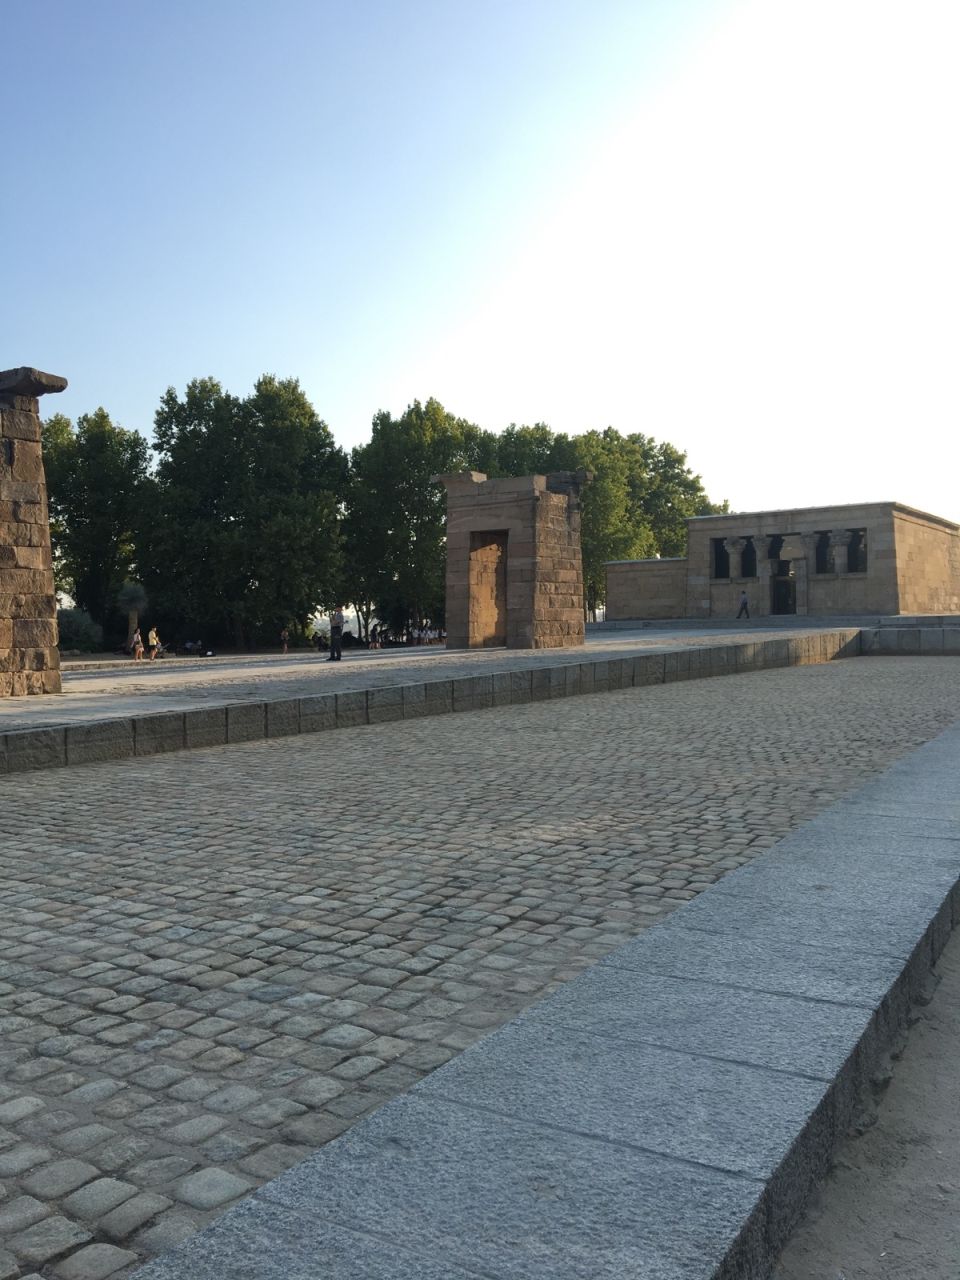 he Templo de Debod is one of the only ancient Egyptian temples that can be found outside of Egypt